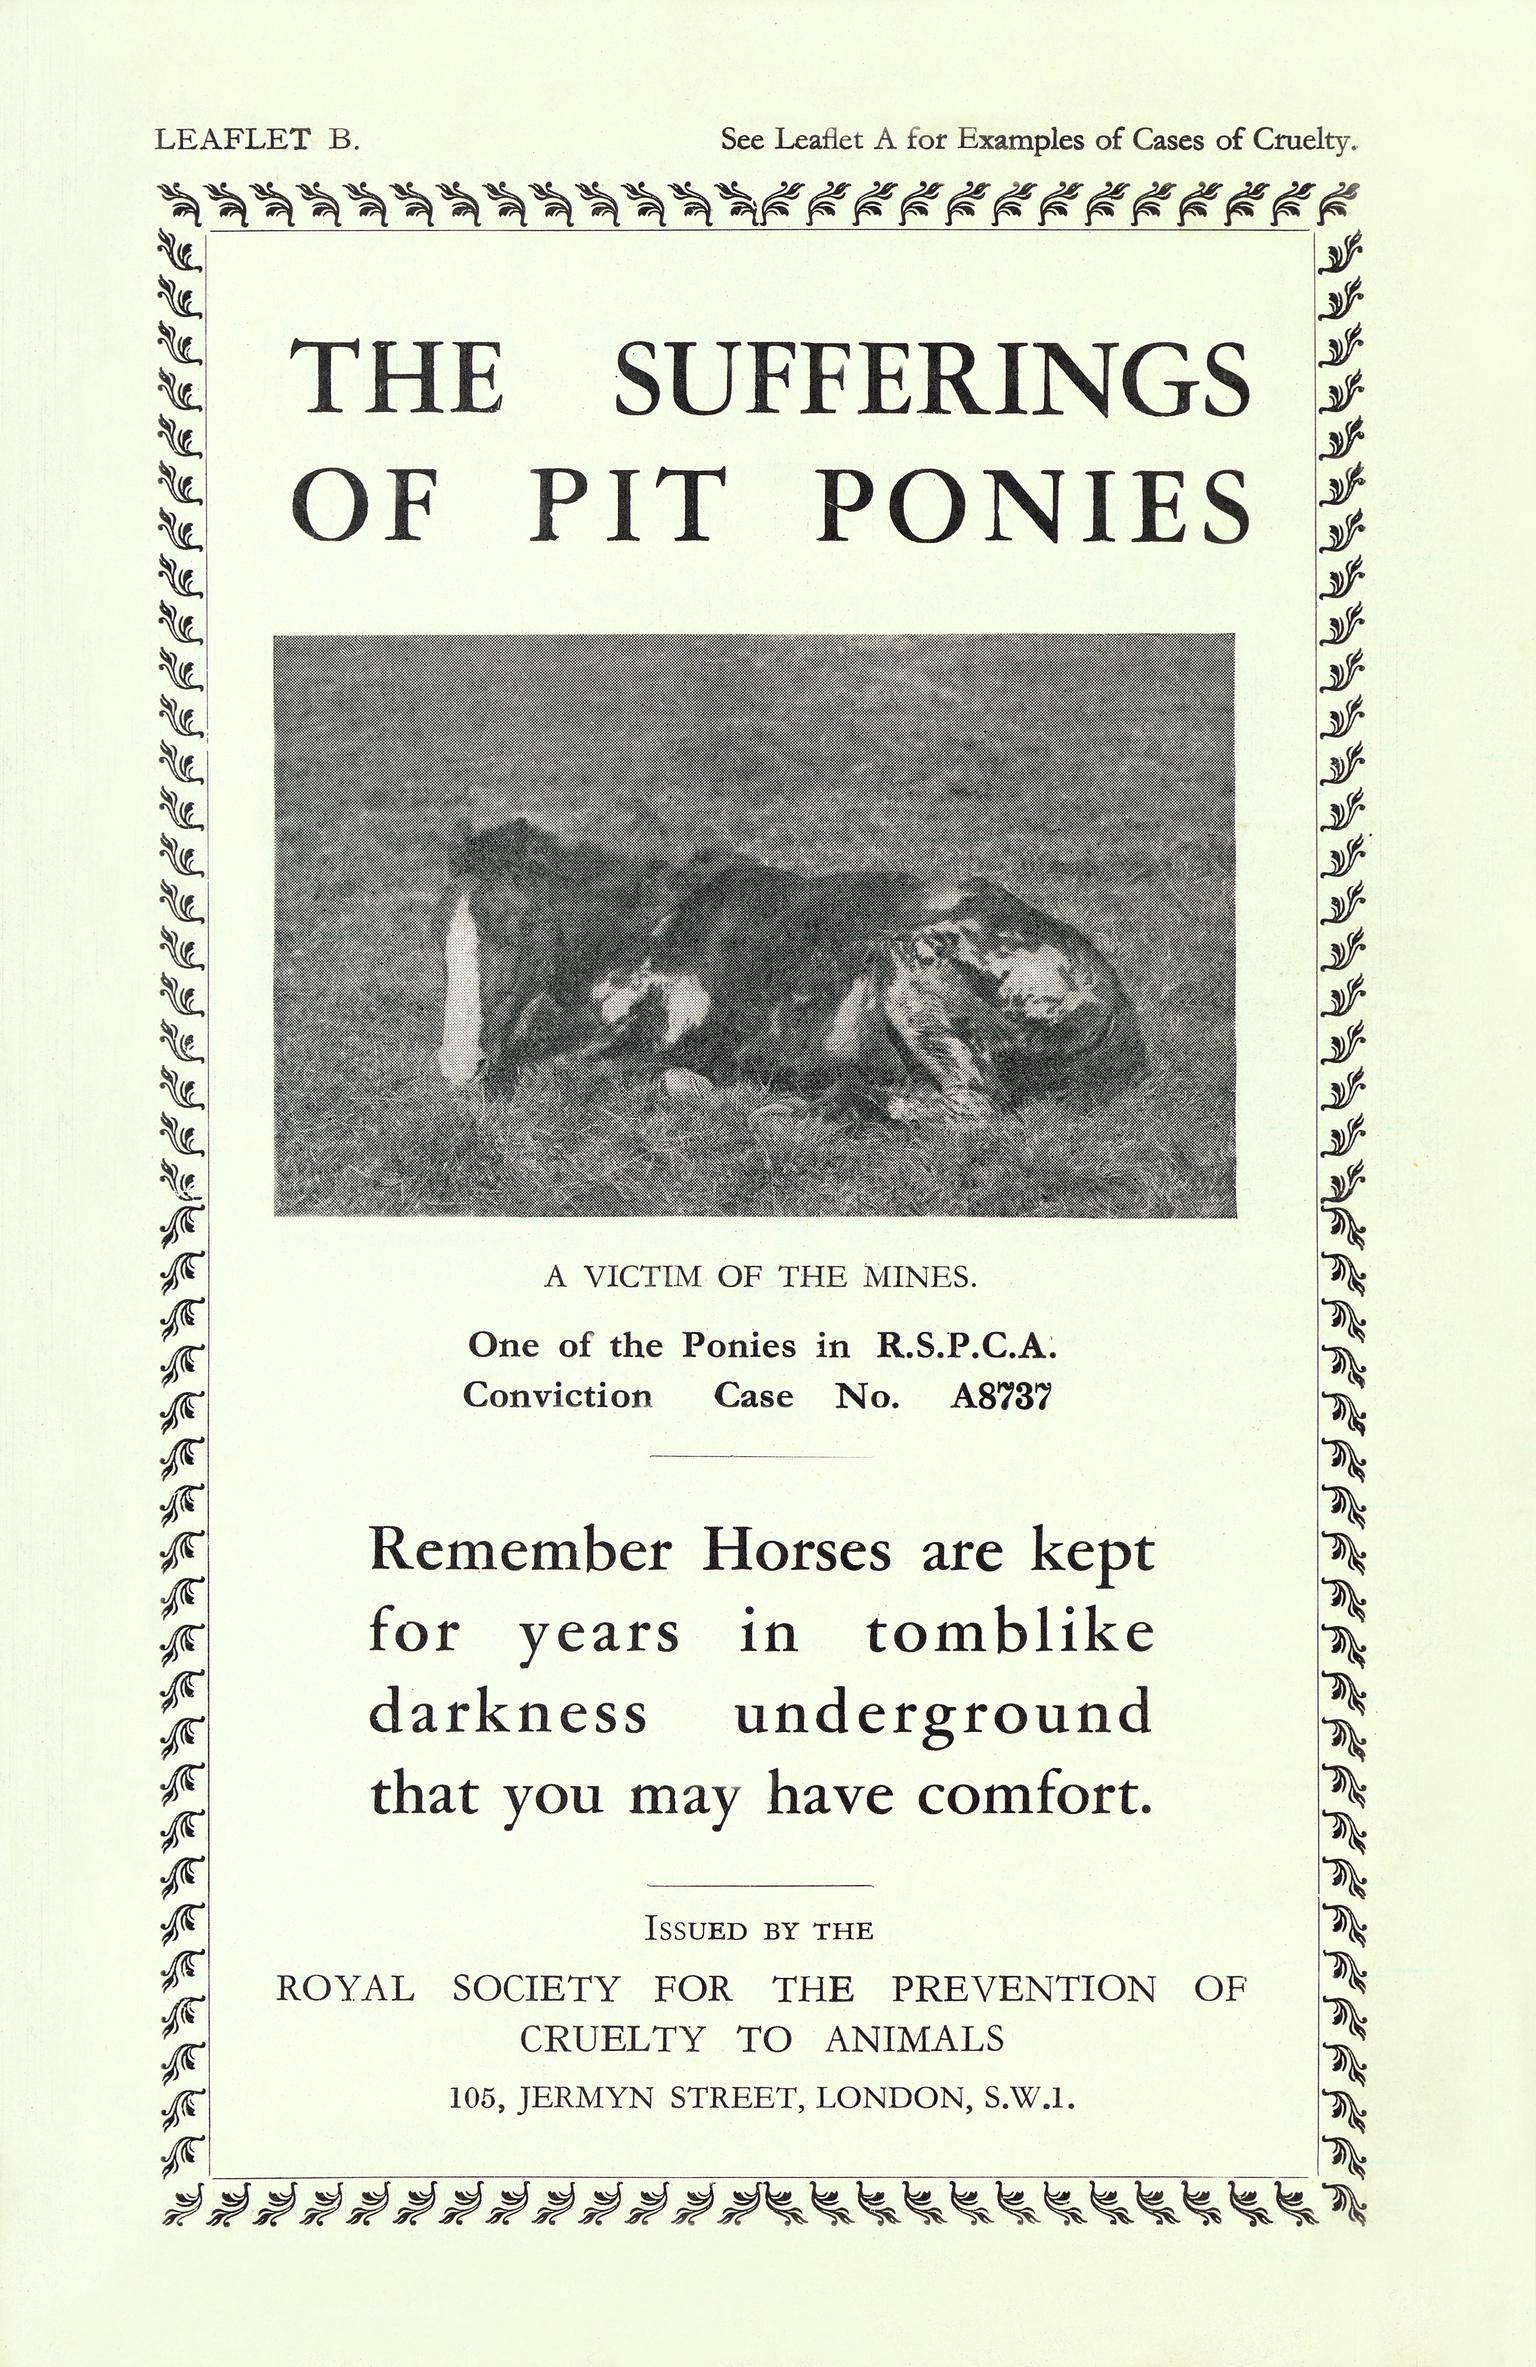 The Sufferings of Pit Ponies (booklet)